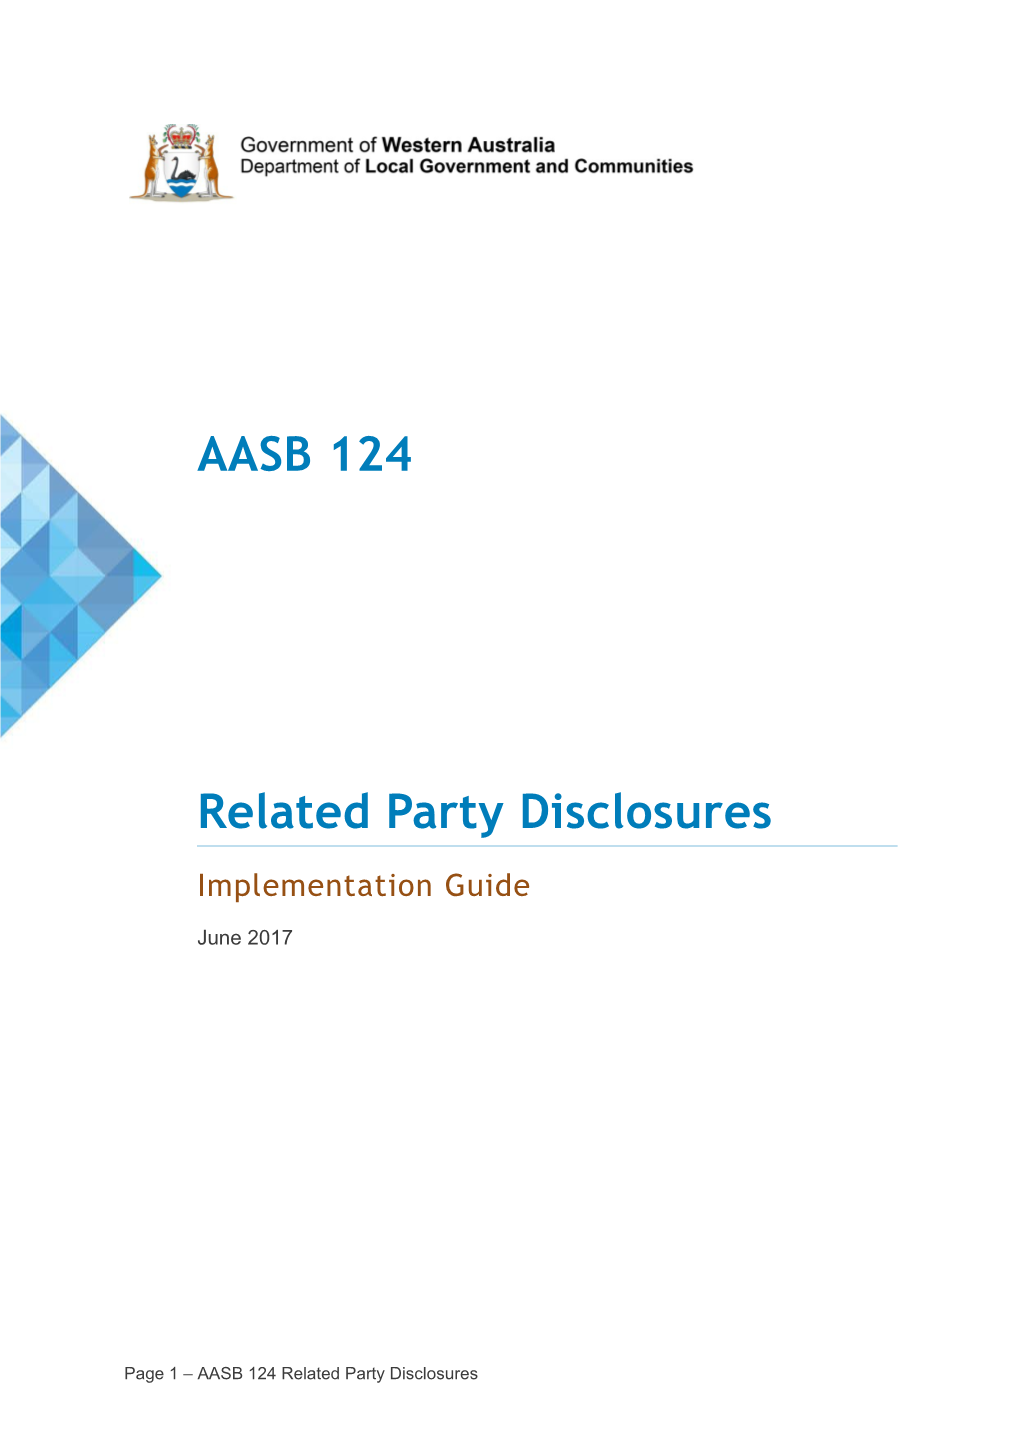 AASB 124 Related Party Disclosures -Information on Implementation